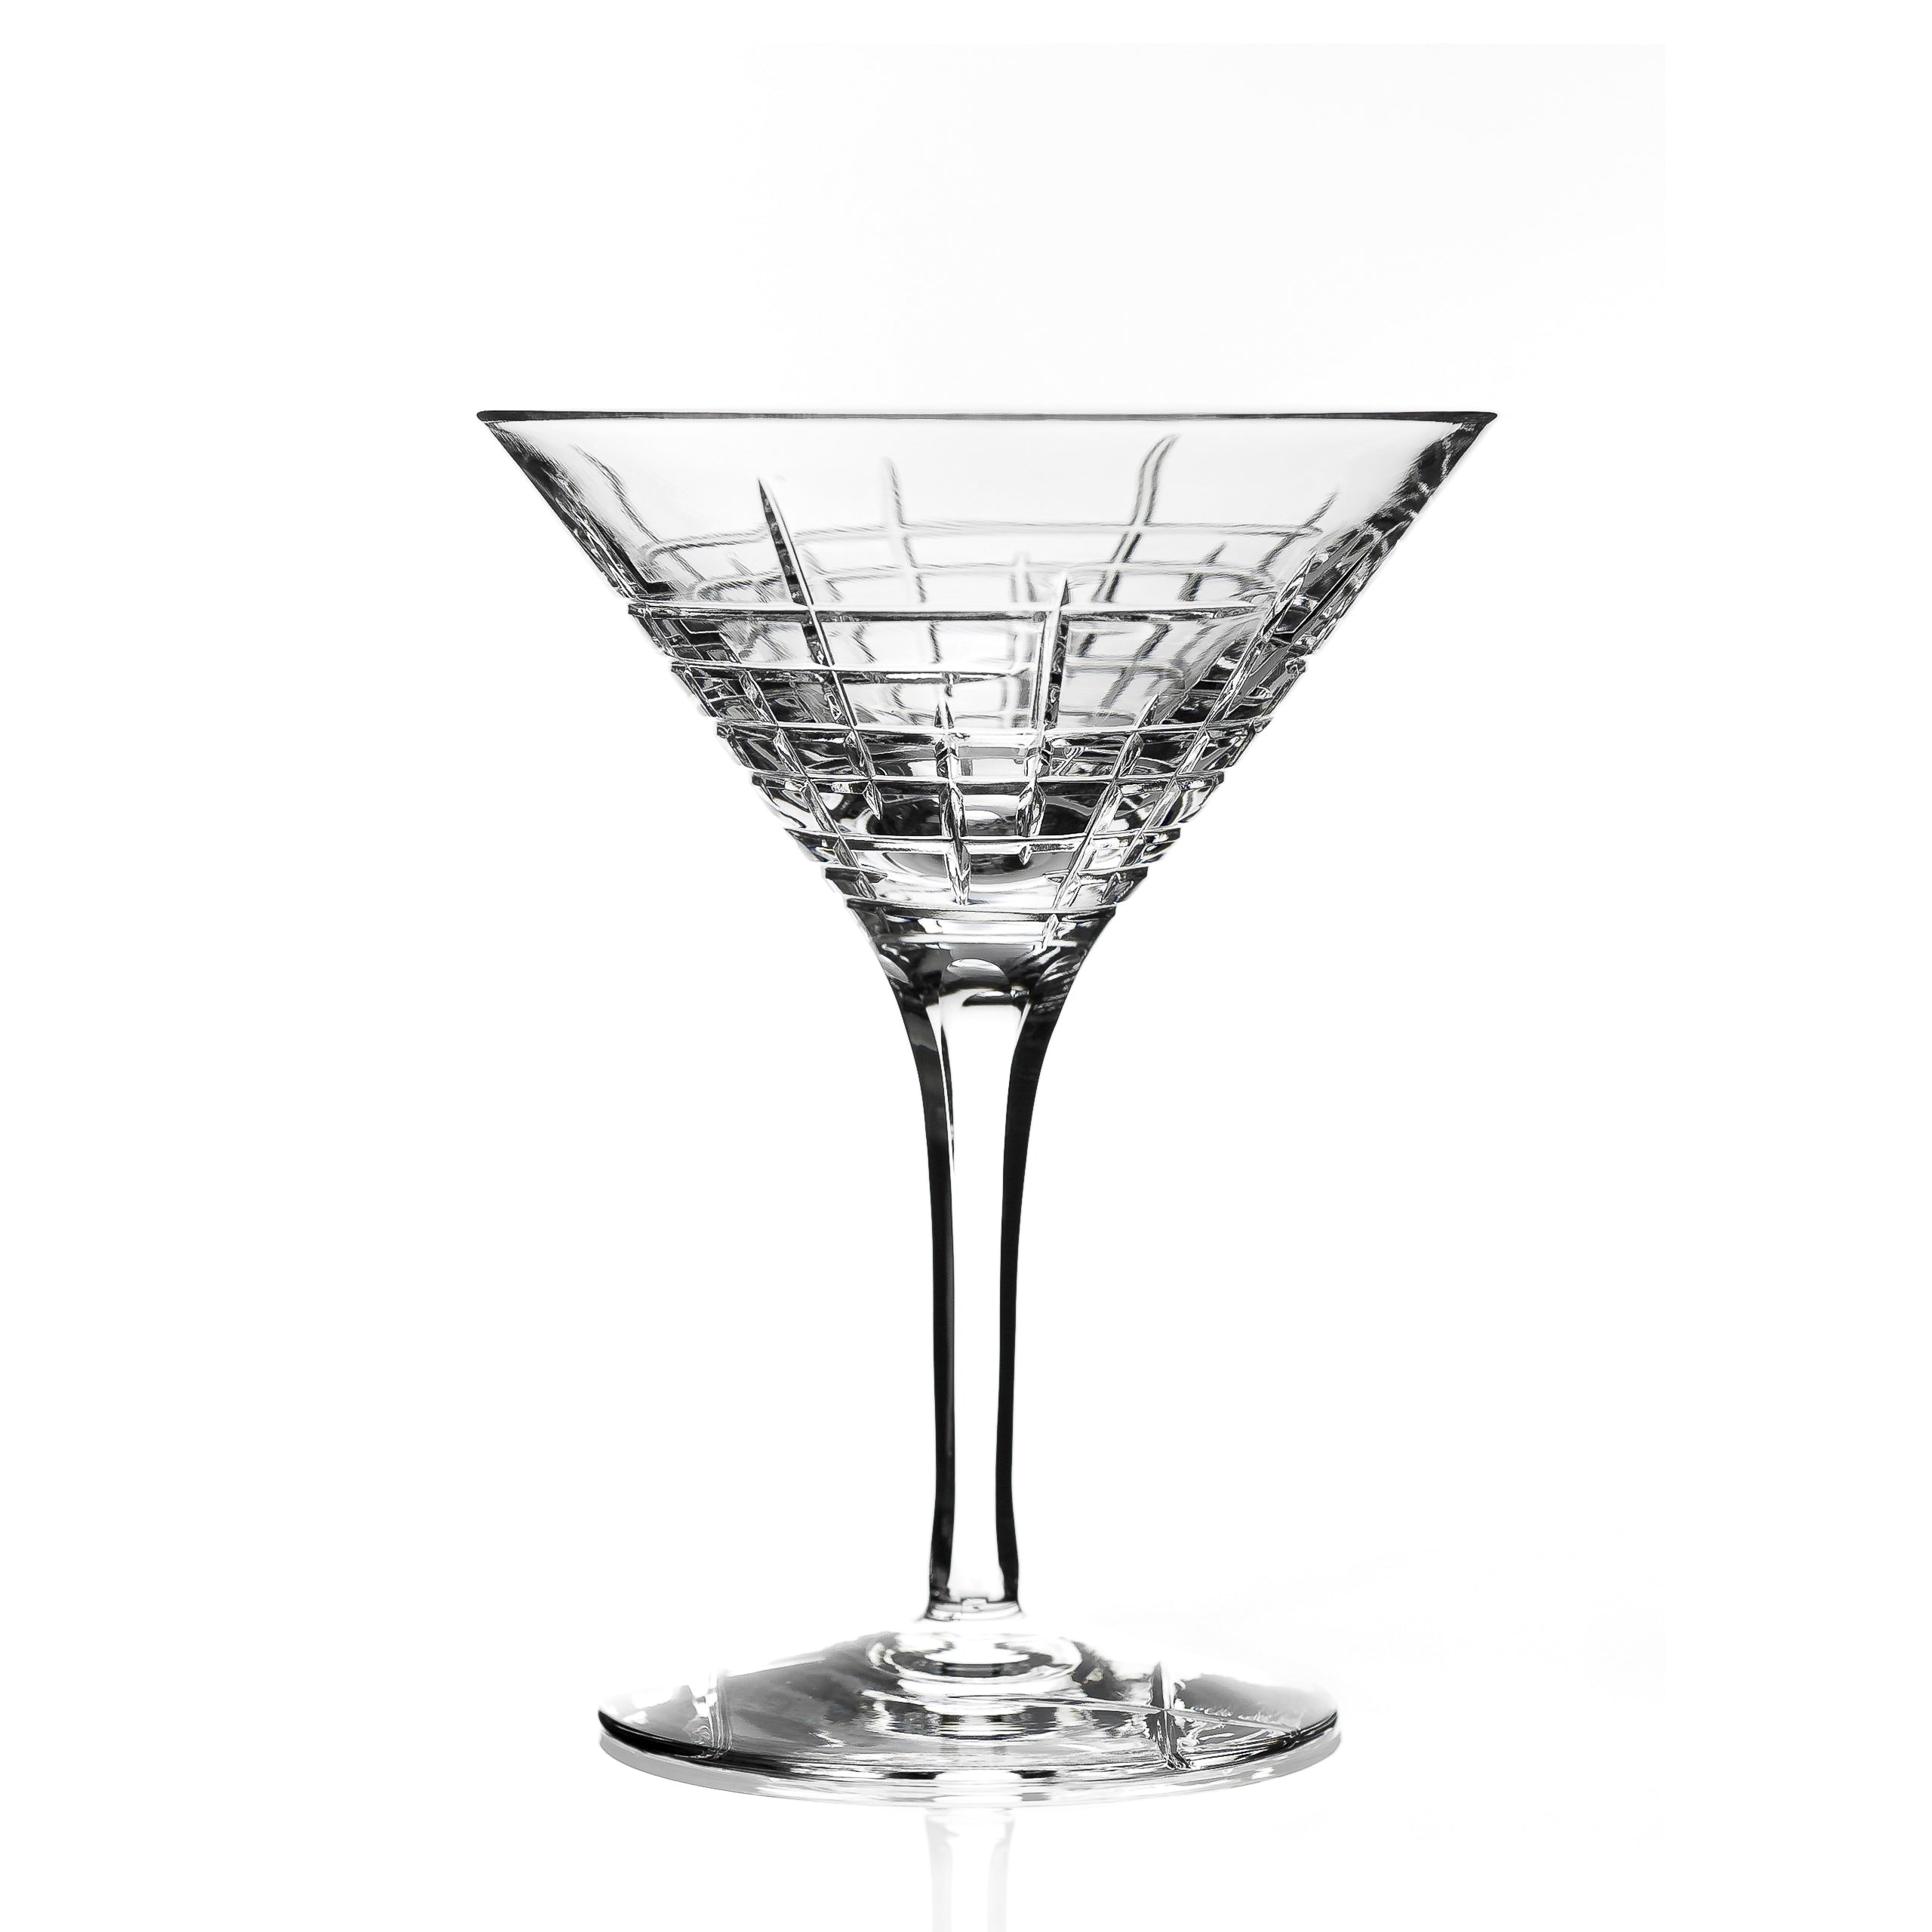 Boogie Woogie Martini (Factory Outlet Stock).